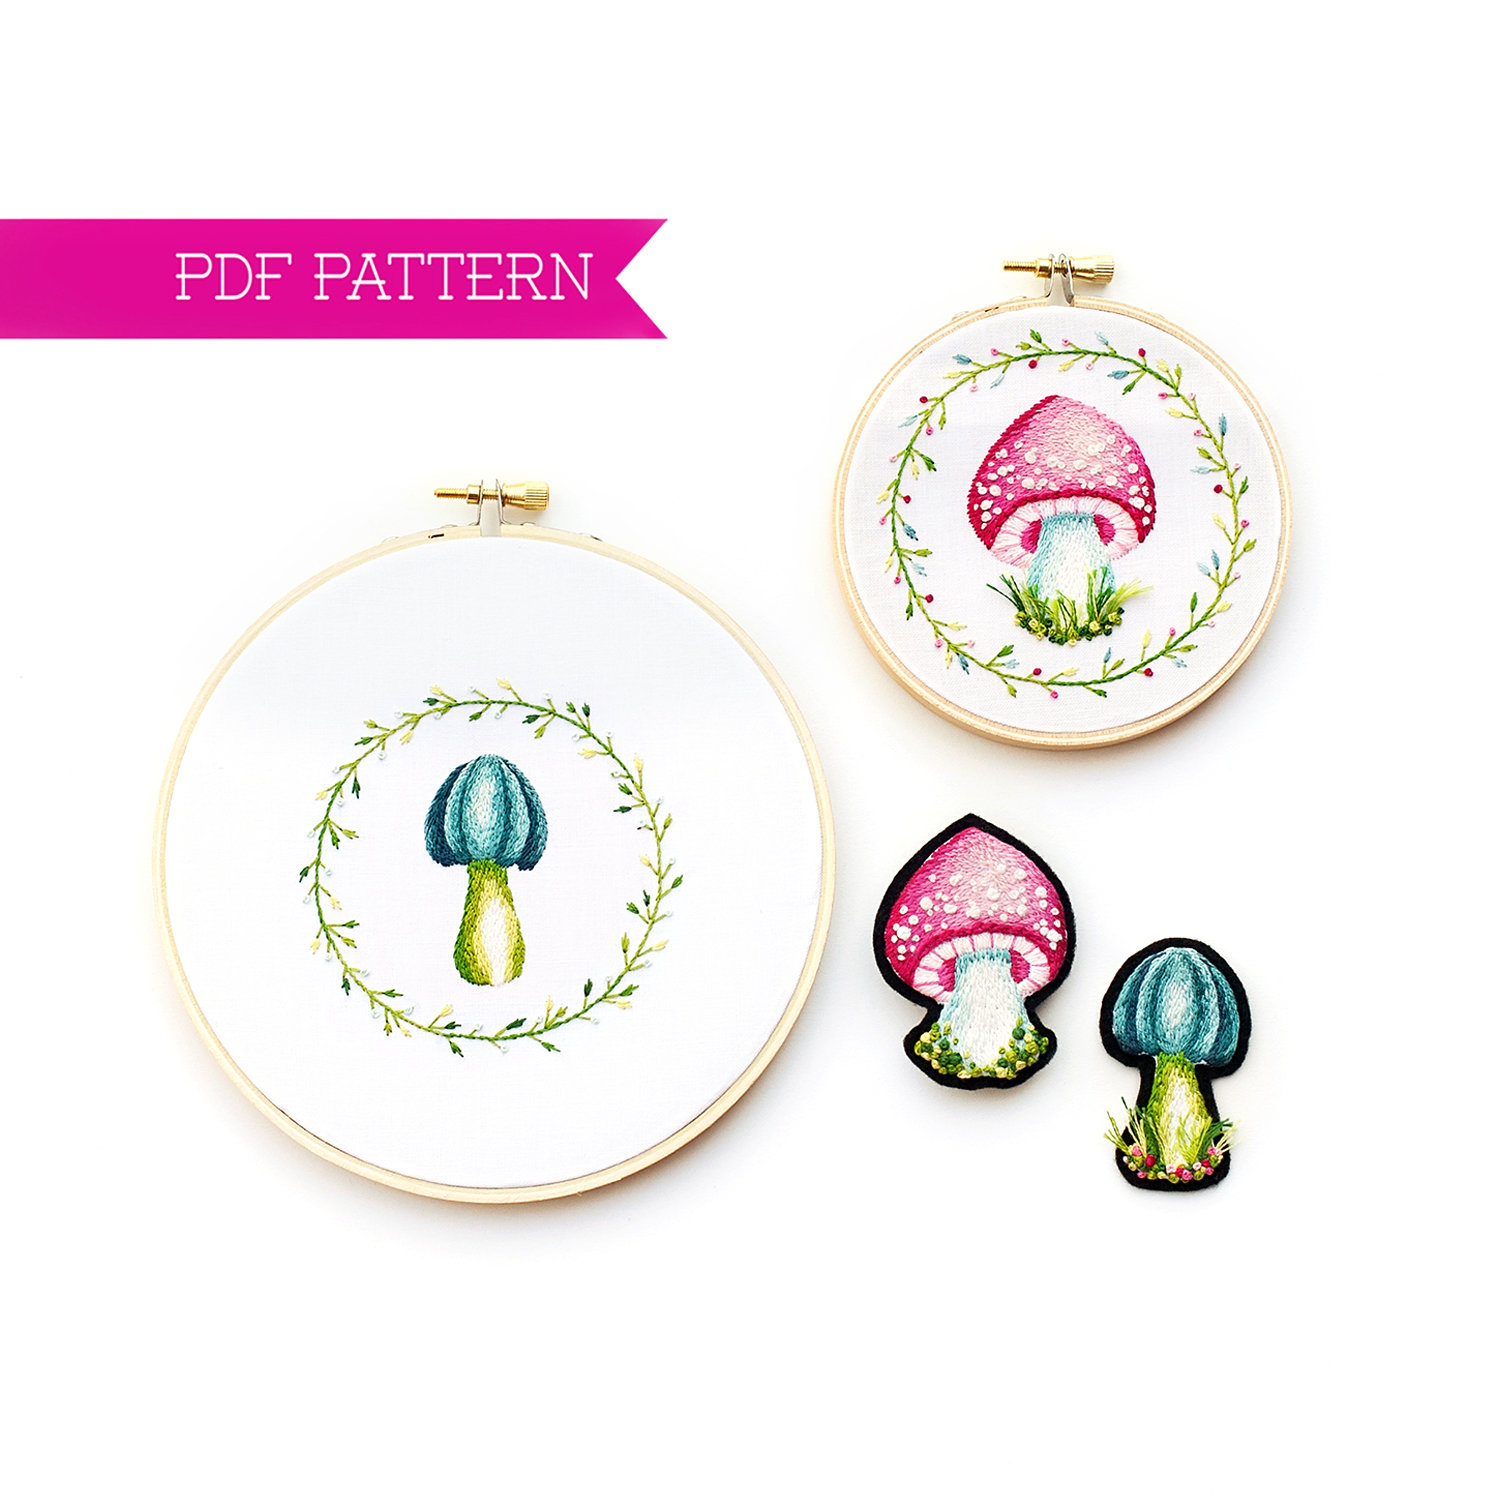 How To Make An Embroidery Pattern Pdf Embroidery Pattern Mushroom Embroidery Pattern Embroidery Tutorial Thread Painting Hand Embroidery Diy Mushroom Digital Pattern